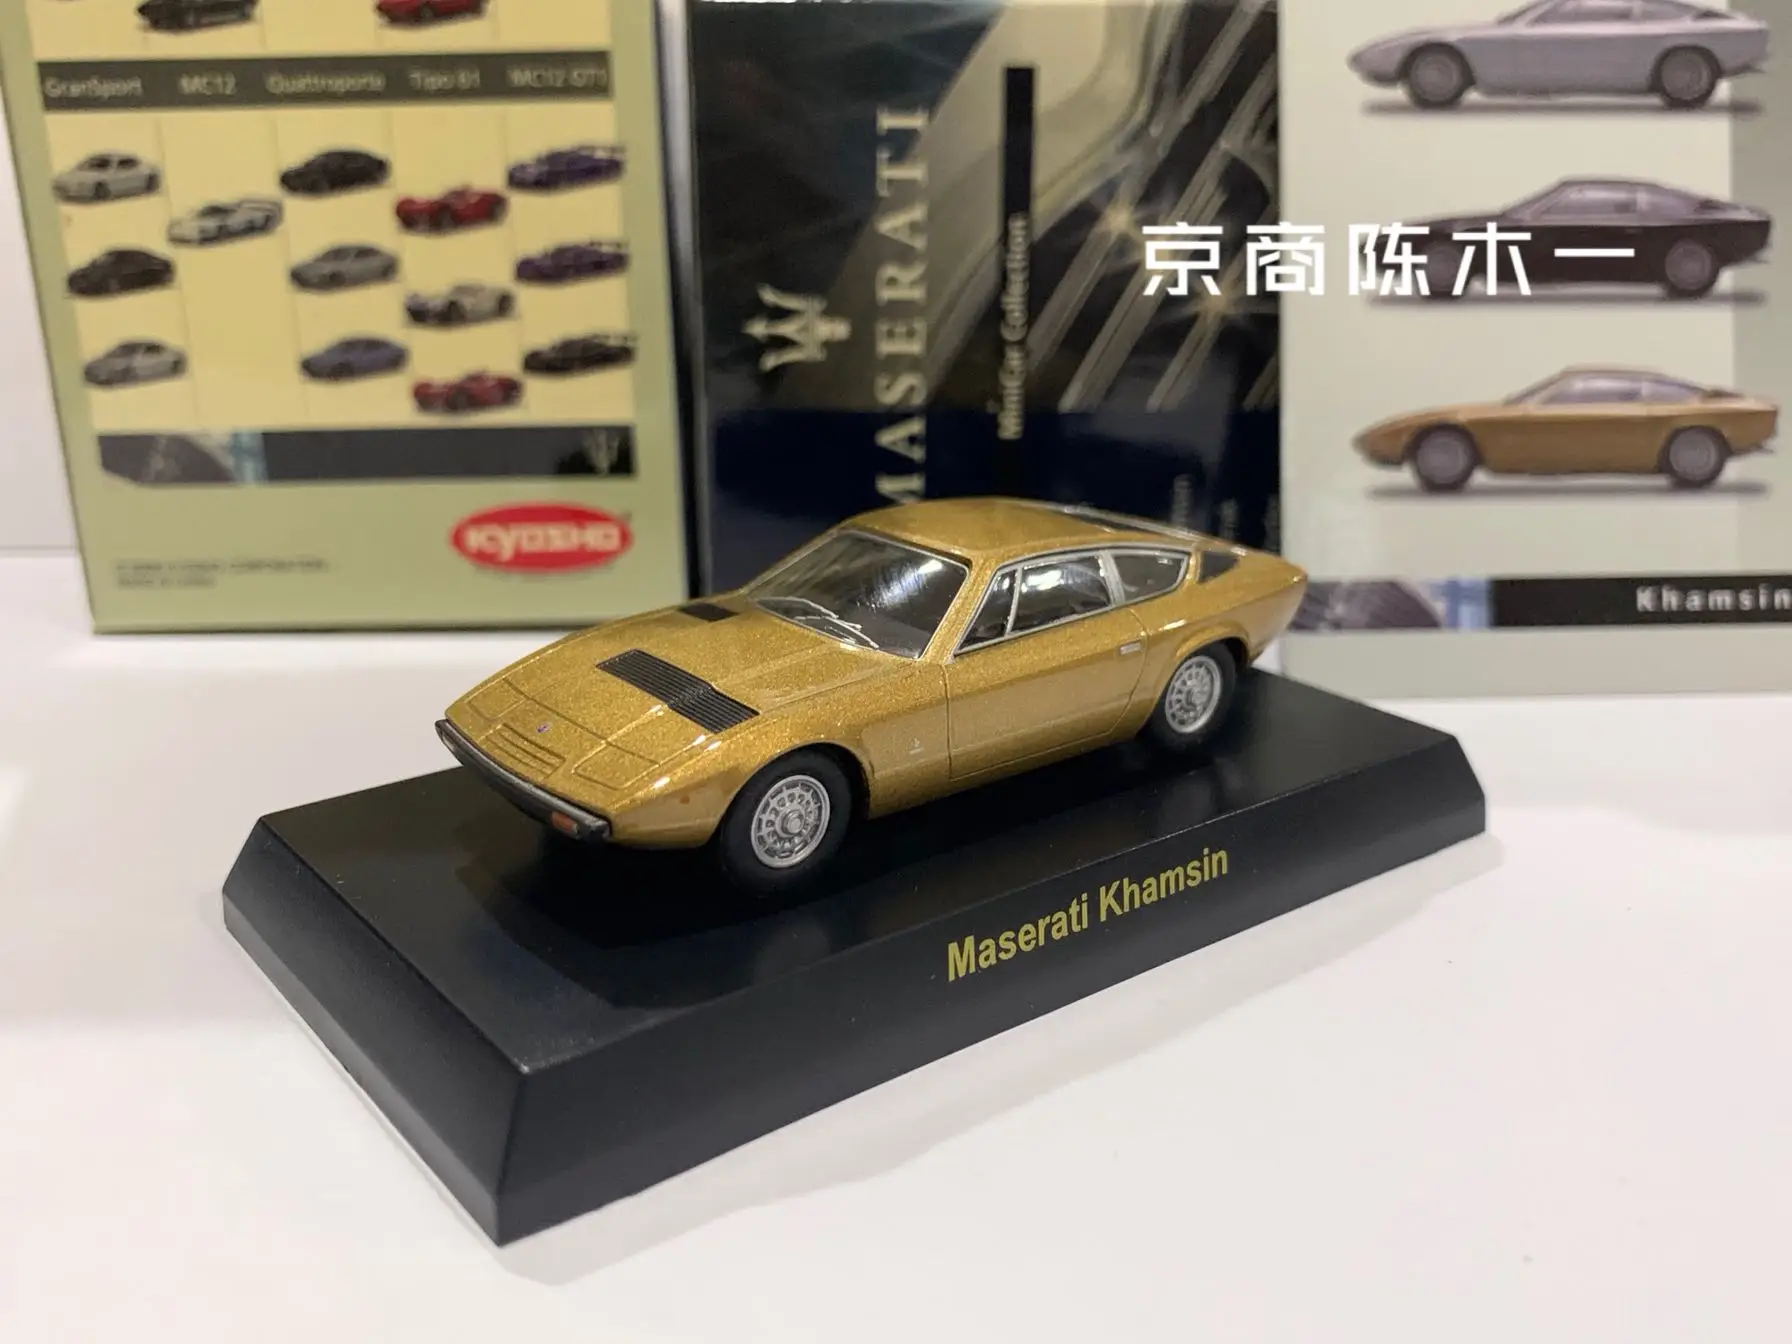 

1/64 KYOSHO Maserati Khamsin LM F1 RACING Collection of die-cast alloy car decoration model toys